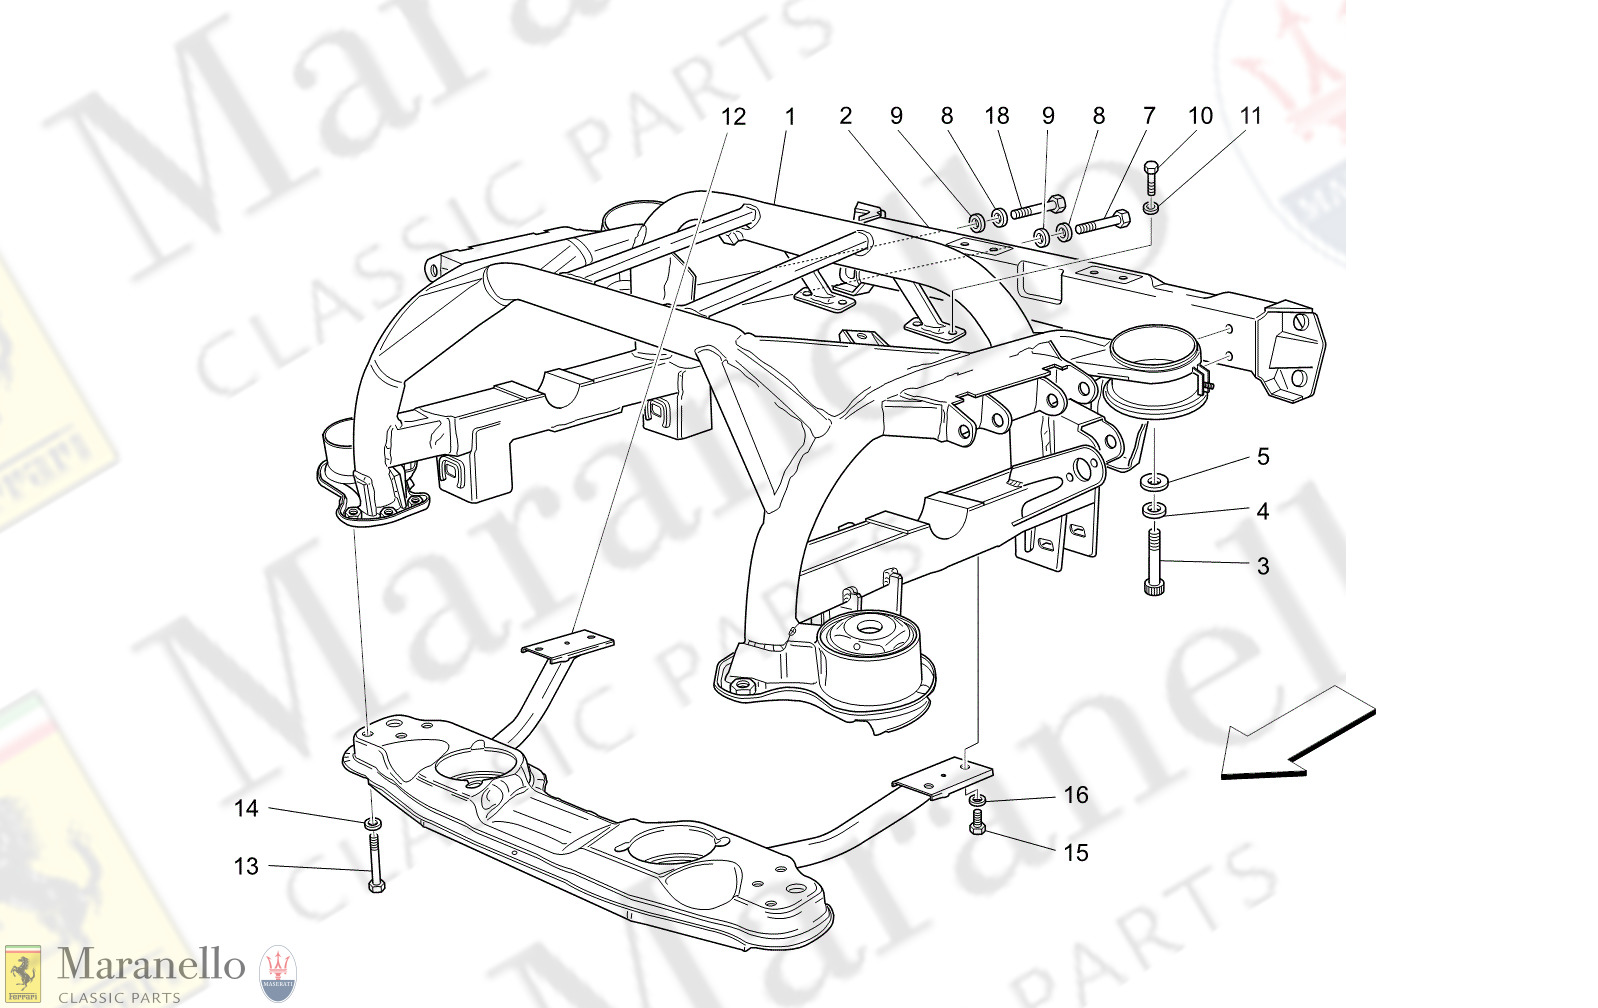 06.22 - 12 - 0622 - 12 Rear Chassis